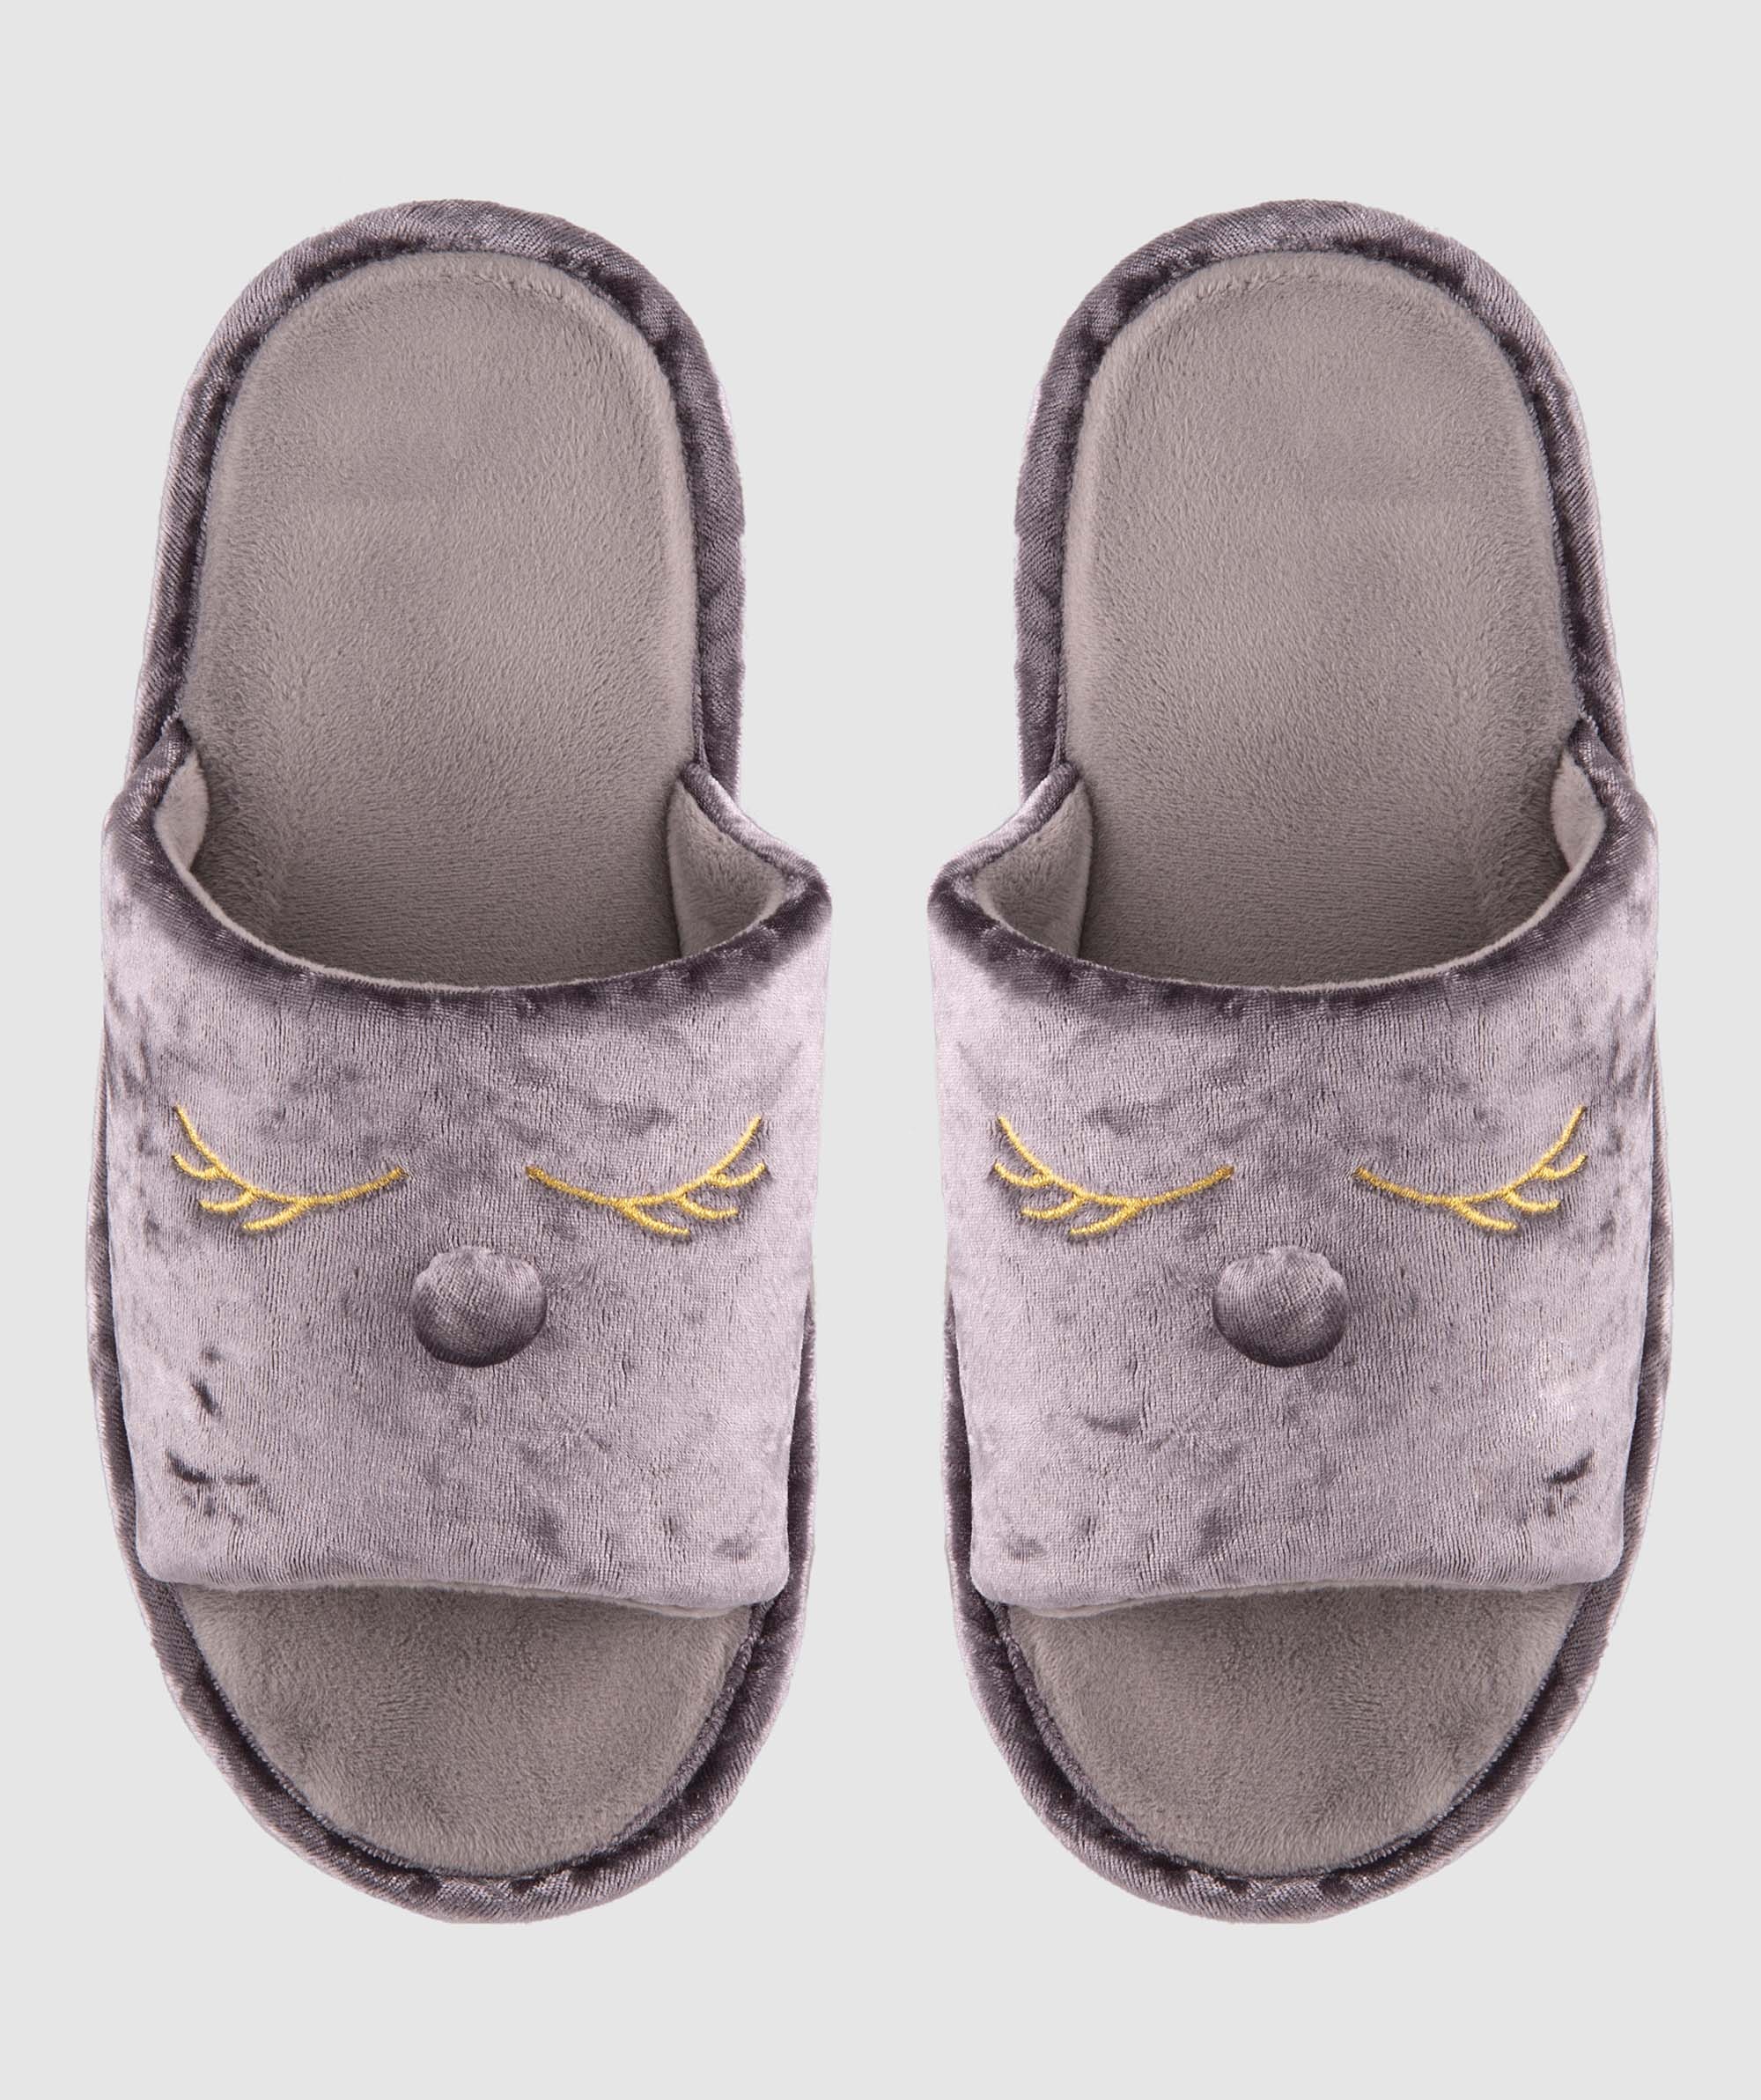 Snooze Slippers - Grey 